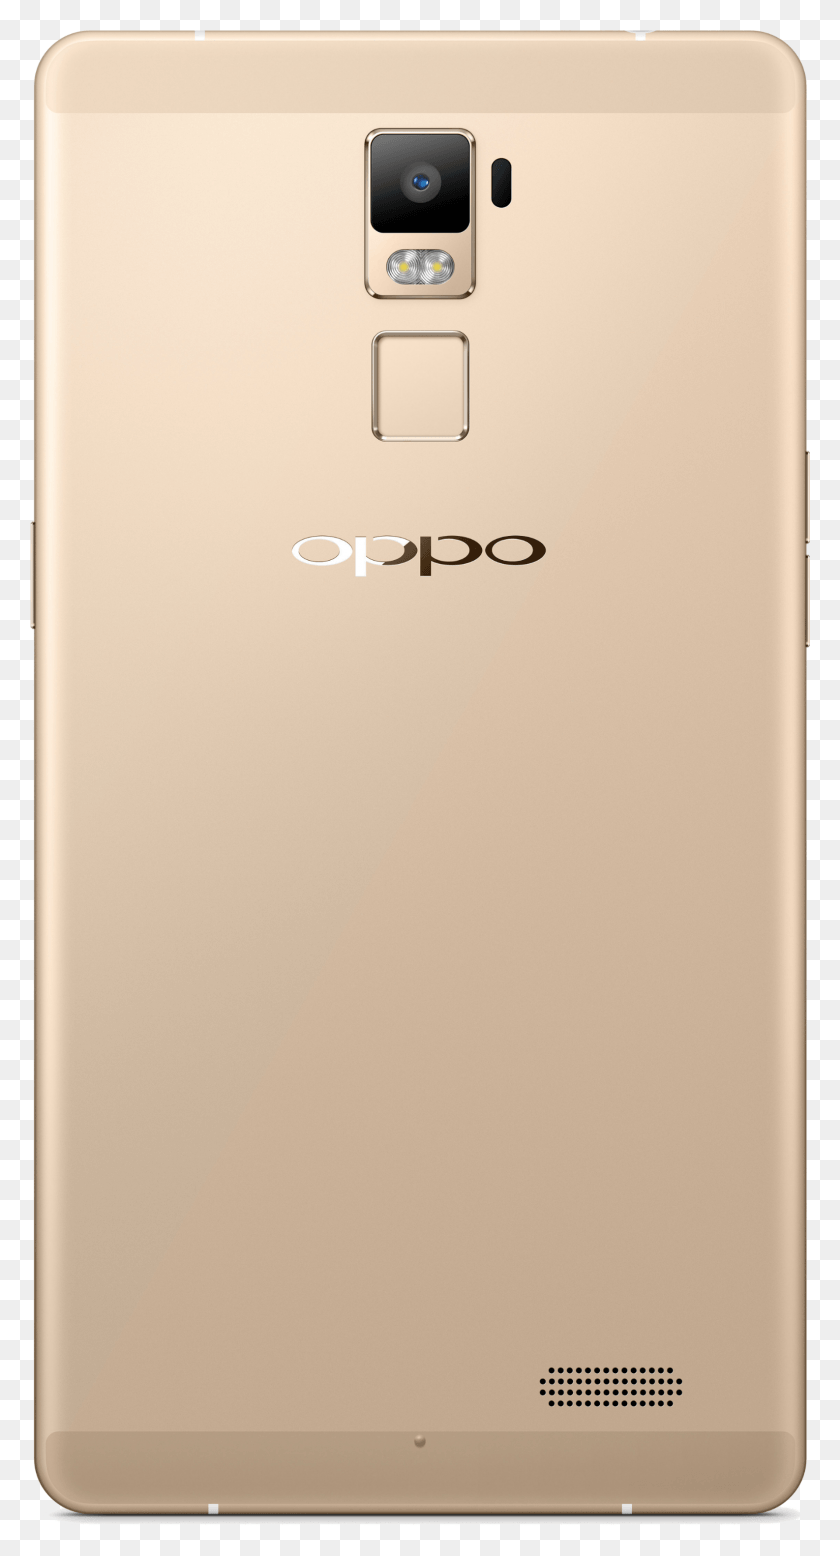 1586x3043 Image Credit Oppo Oppo R7 Plus 64gb Price In India, Electronics, Phone, Mobile Phone HD PNG Download